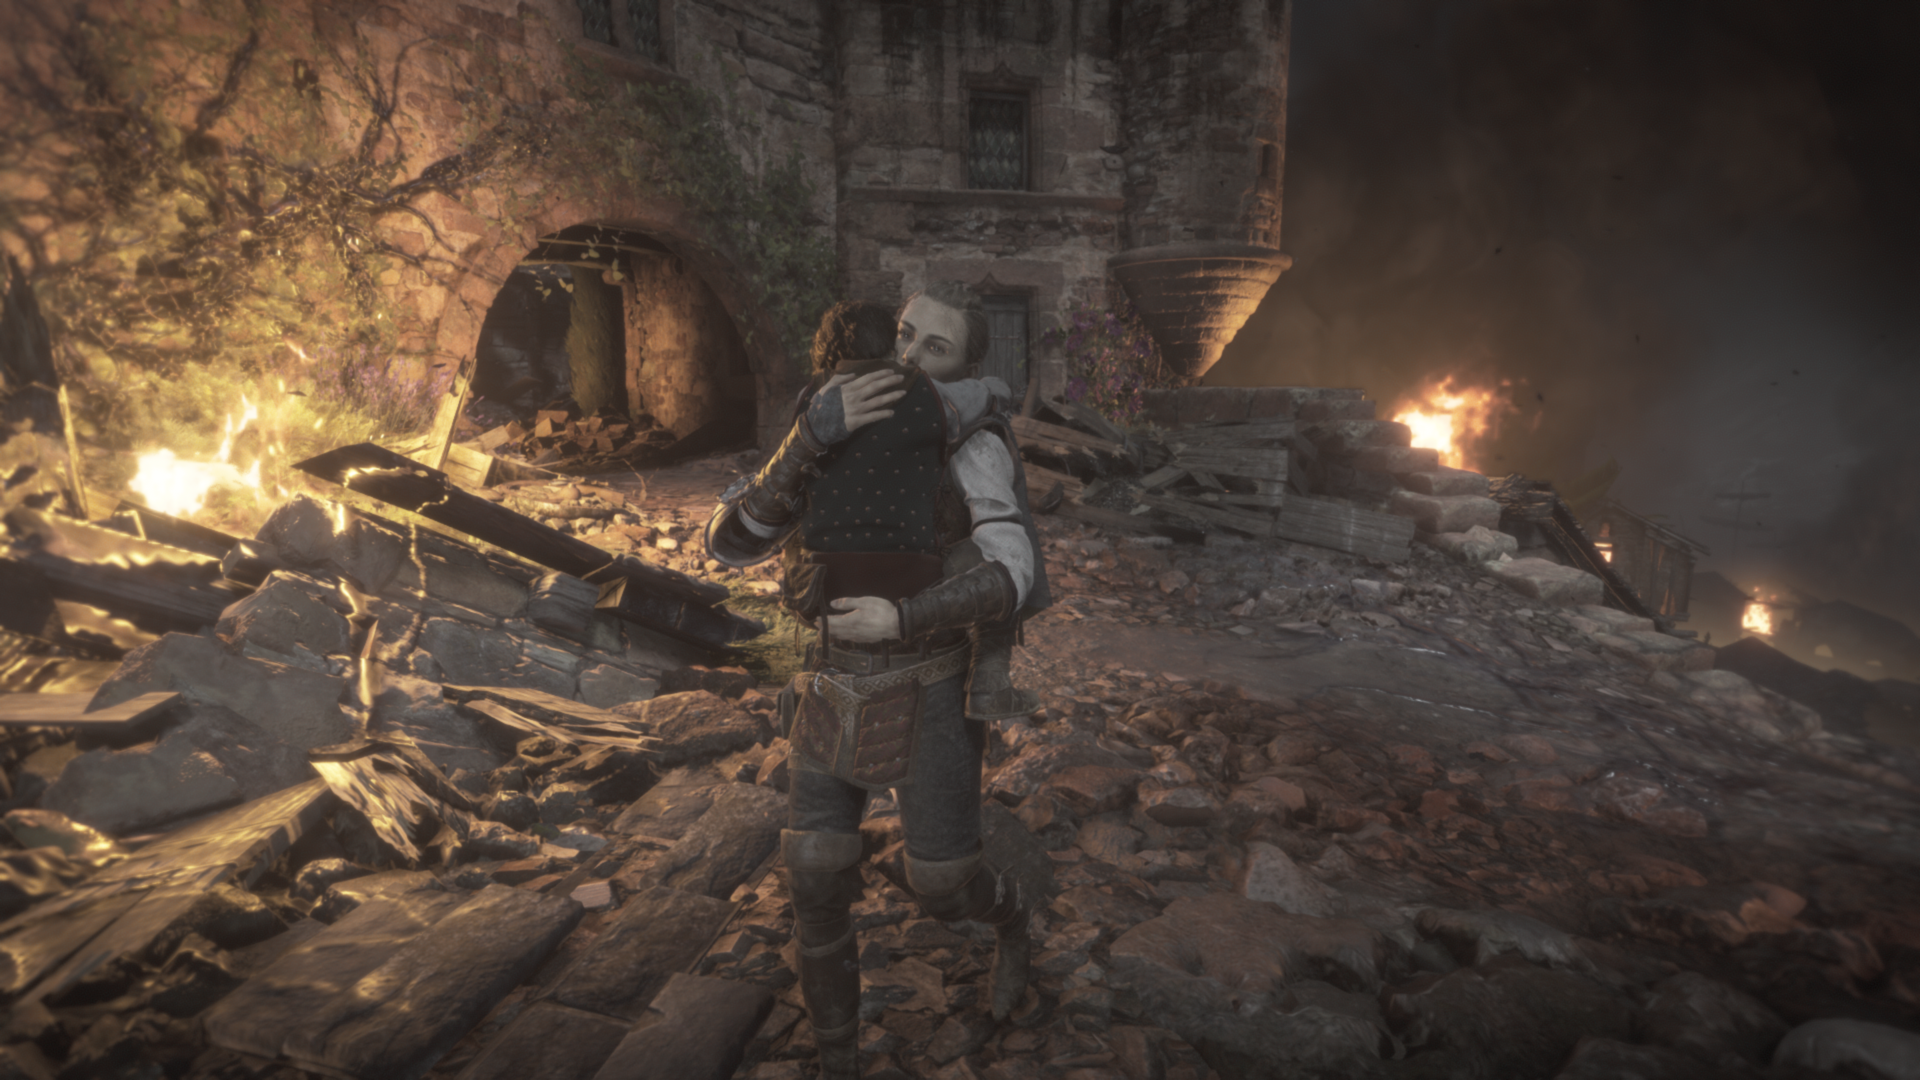 A Plague Tale: Requiem review: Grief, and how to deal with it